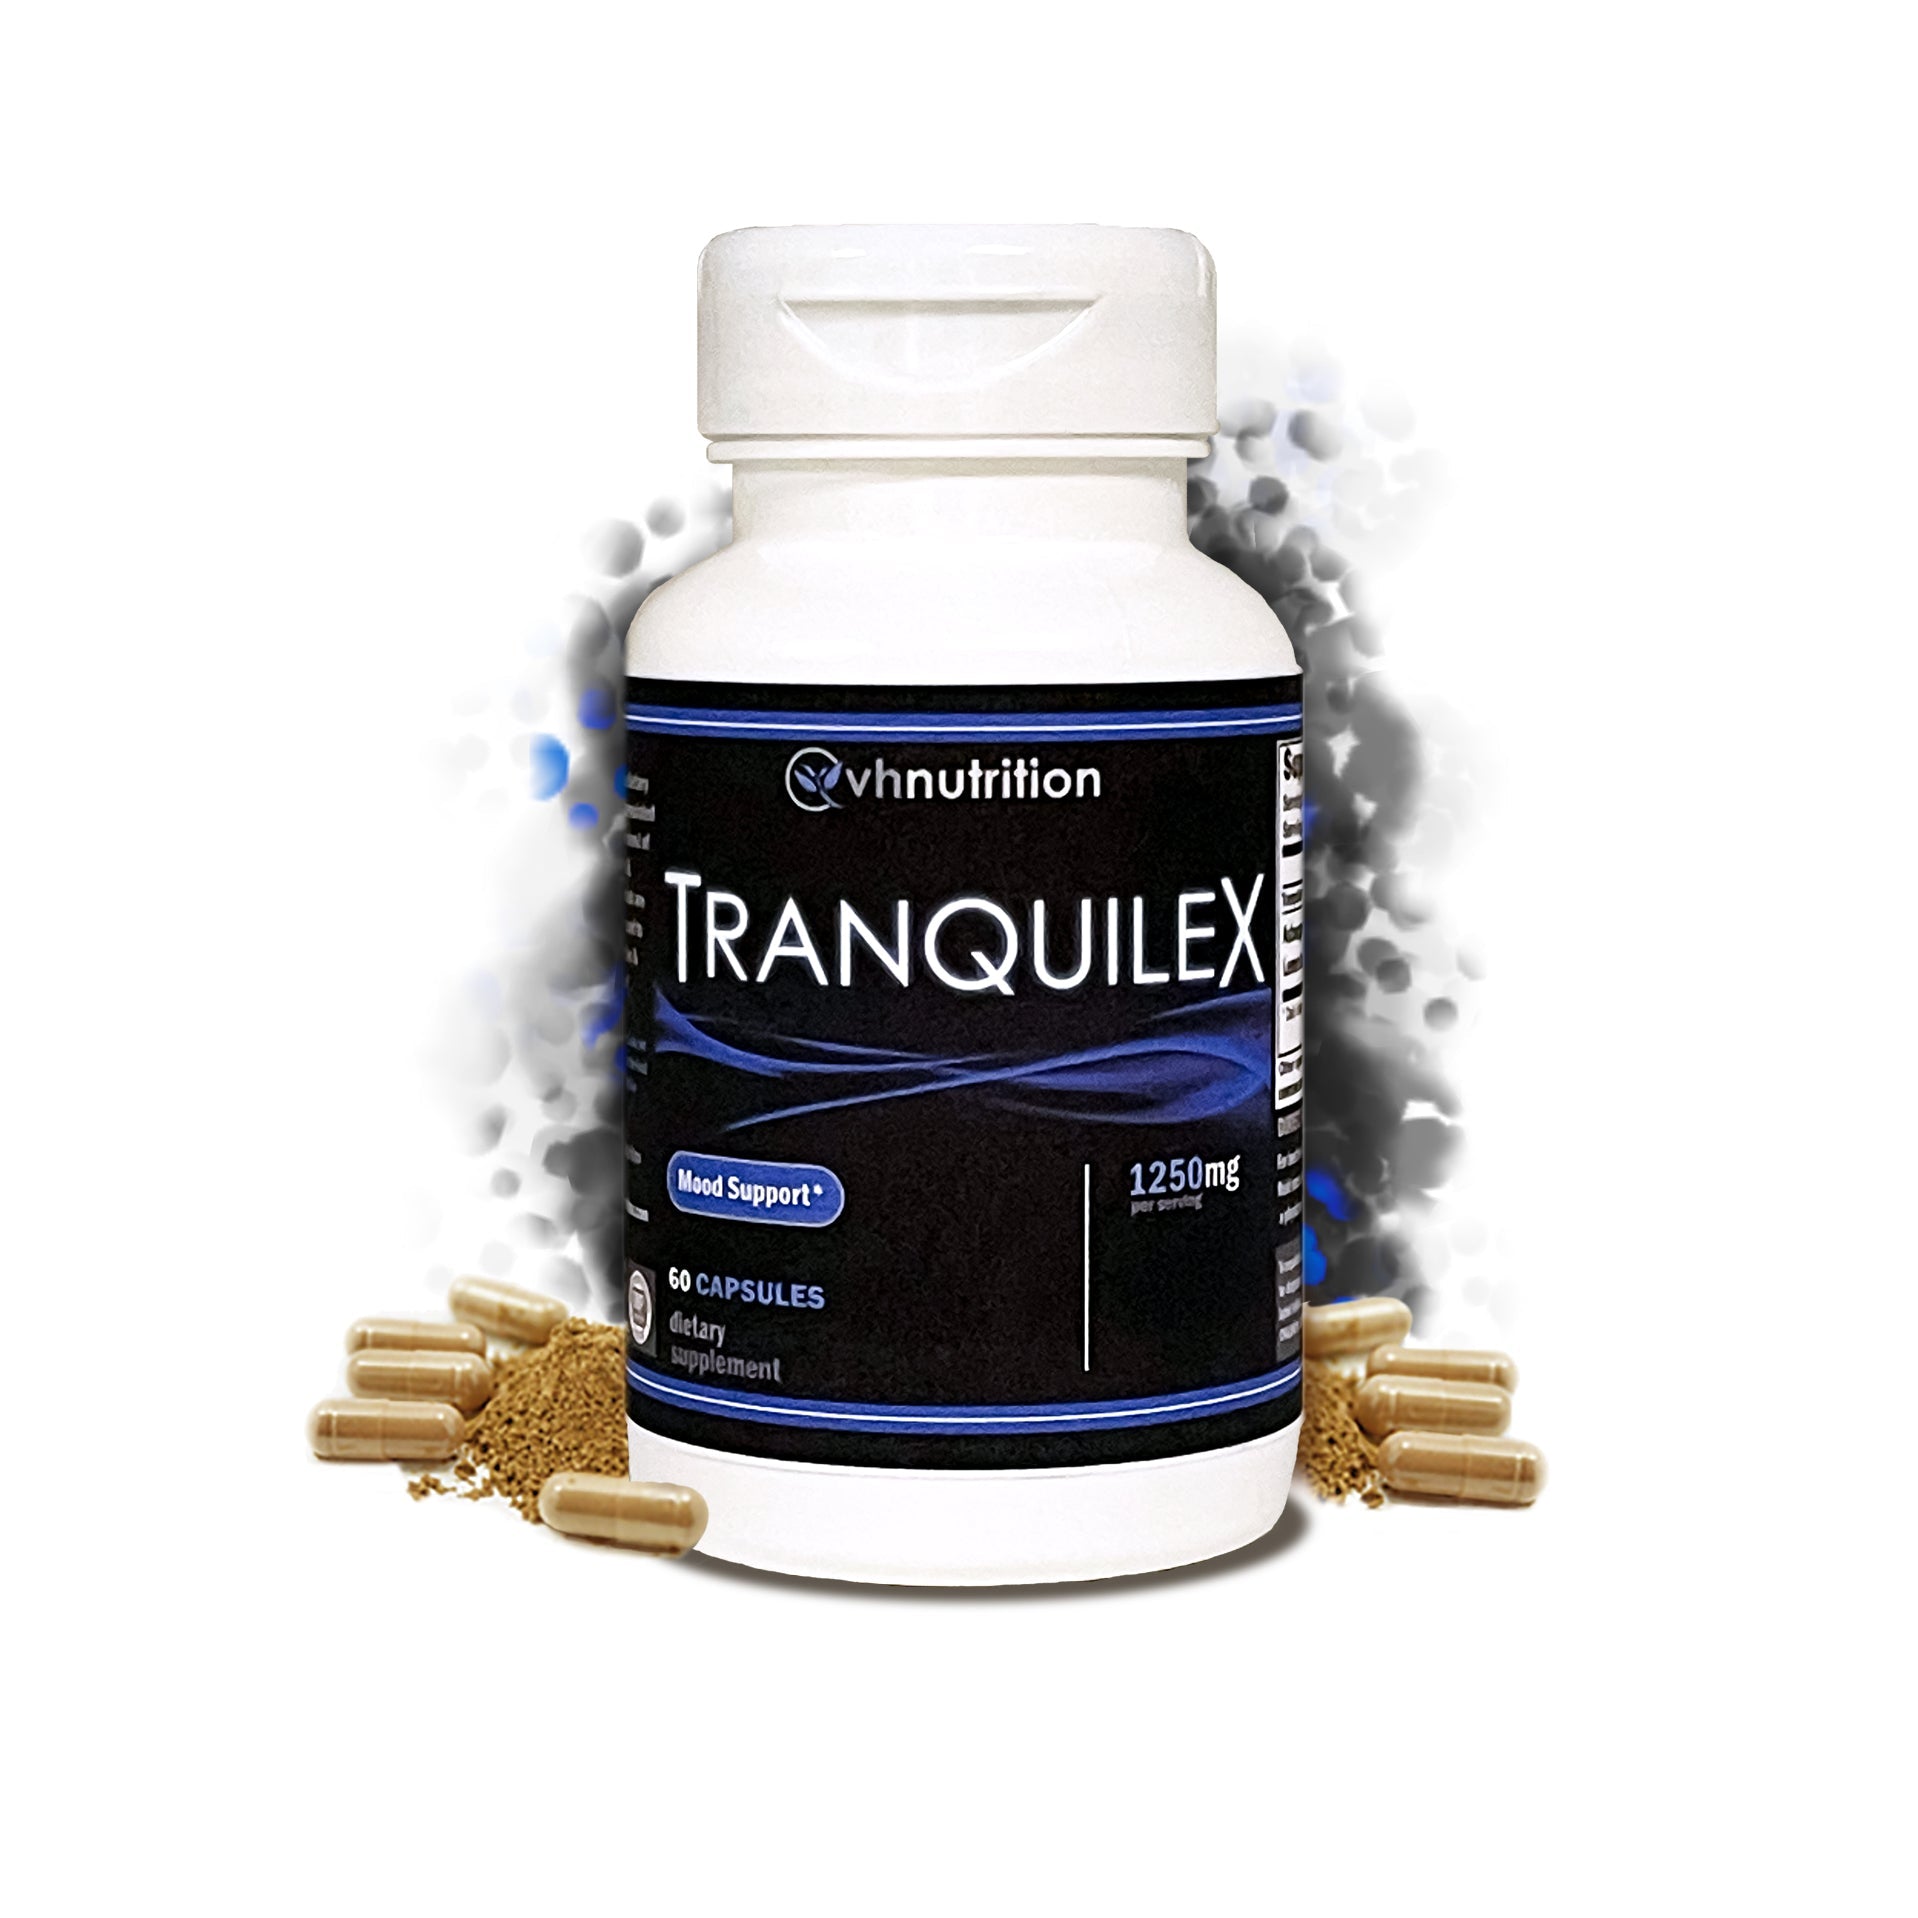 VH Nutrition TRANQUILEX | Stress Relief Supplement* | Ashwagandha, Passion Flower, Kava Kava, Lemon Balm, Licorice Root, and Lavender | 60 Capsules